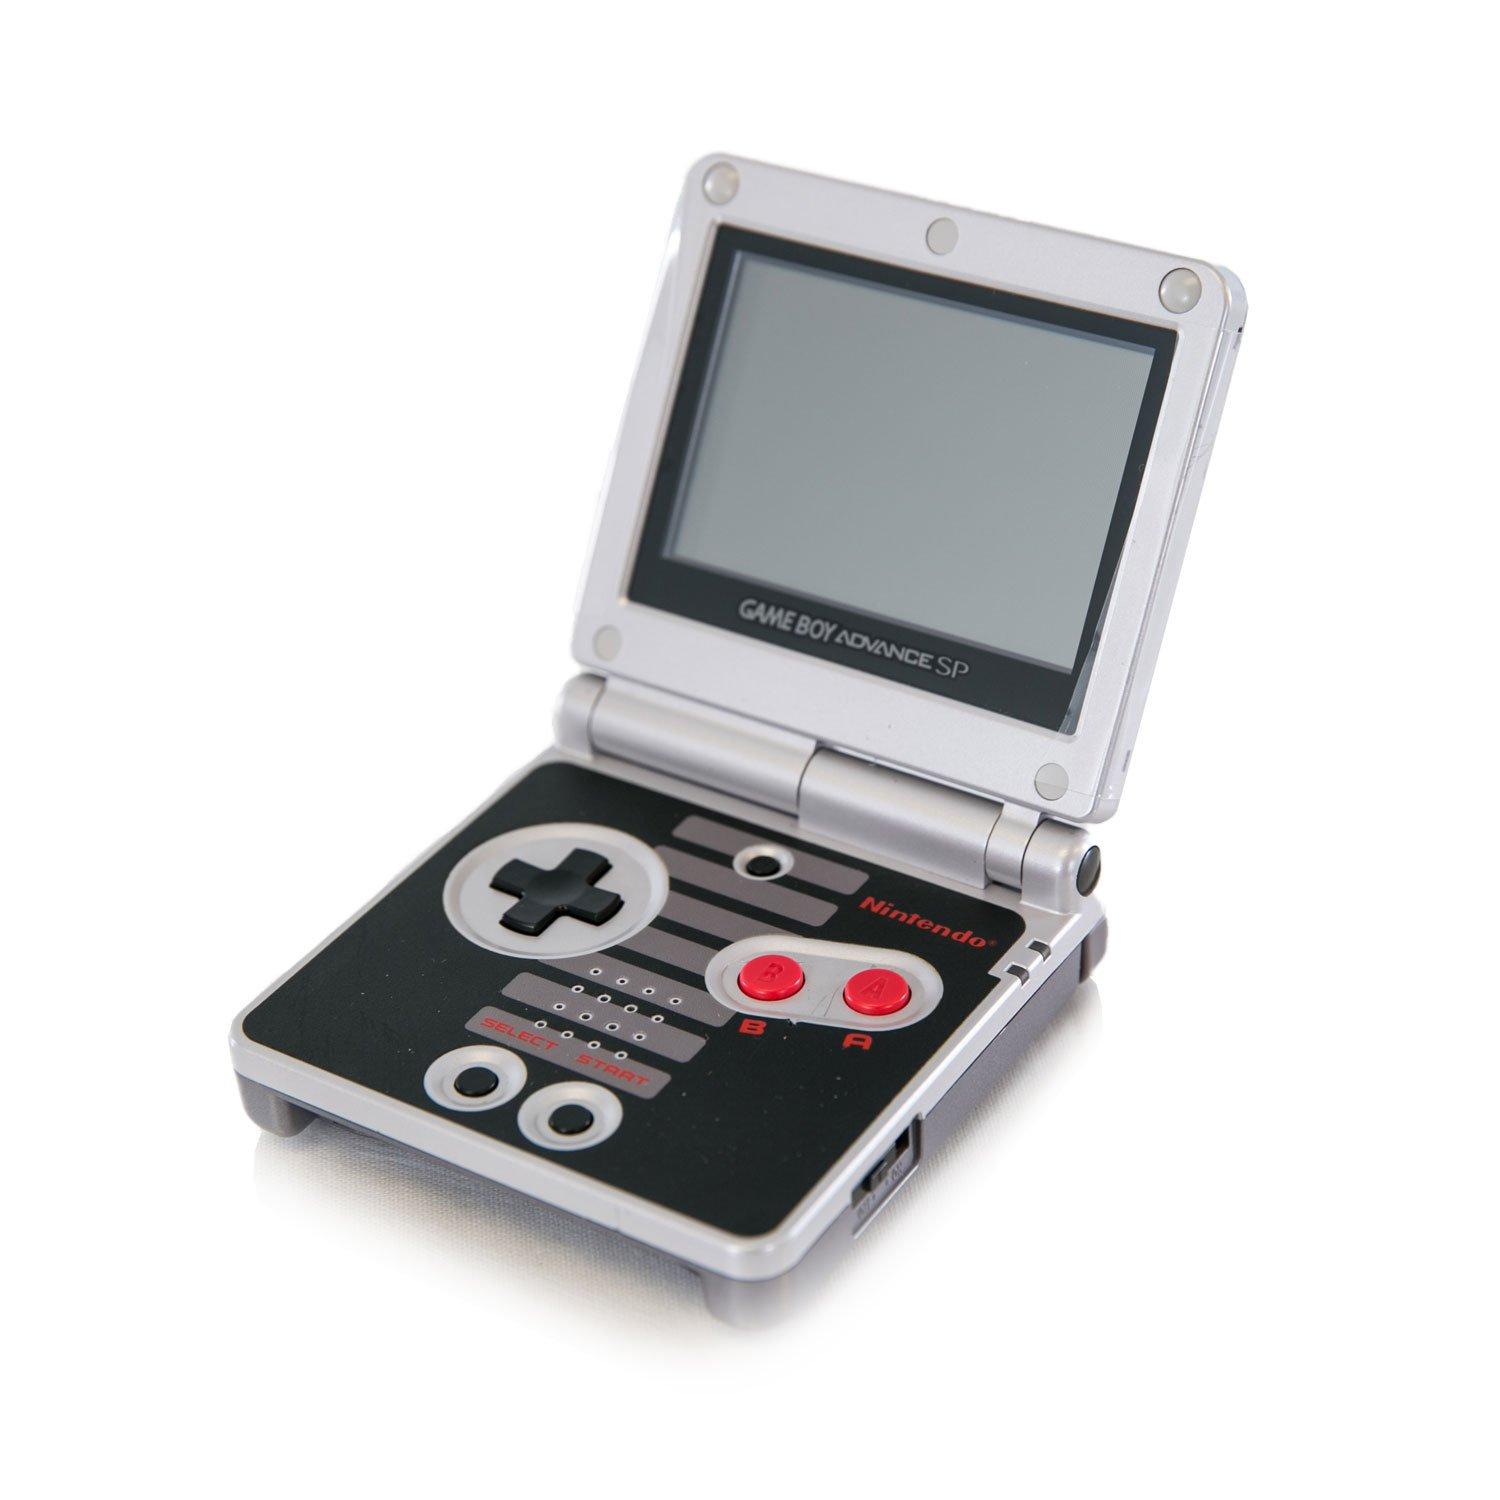 gameboy advance sp classic nes edition